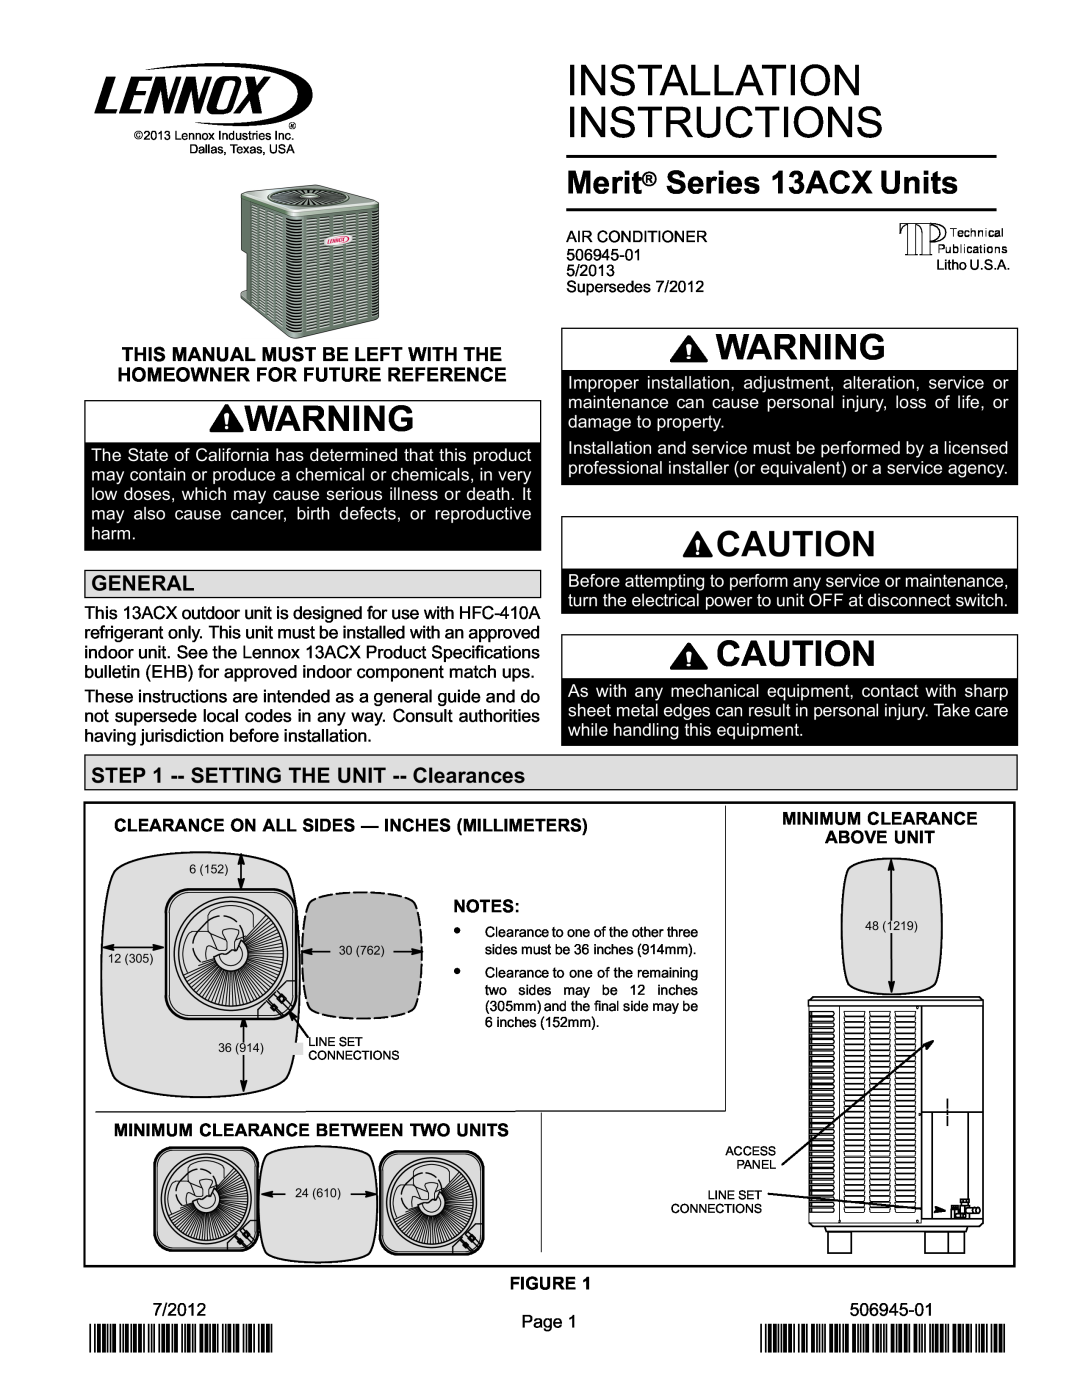 Lennox International Inc Merit Series Air Conditioner installation instructions General, SETTING THE UNIT --Clearances 